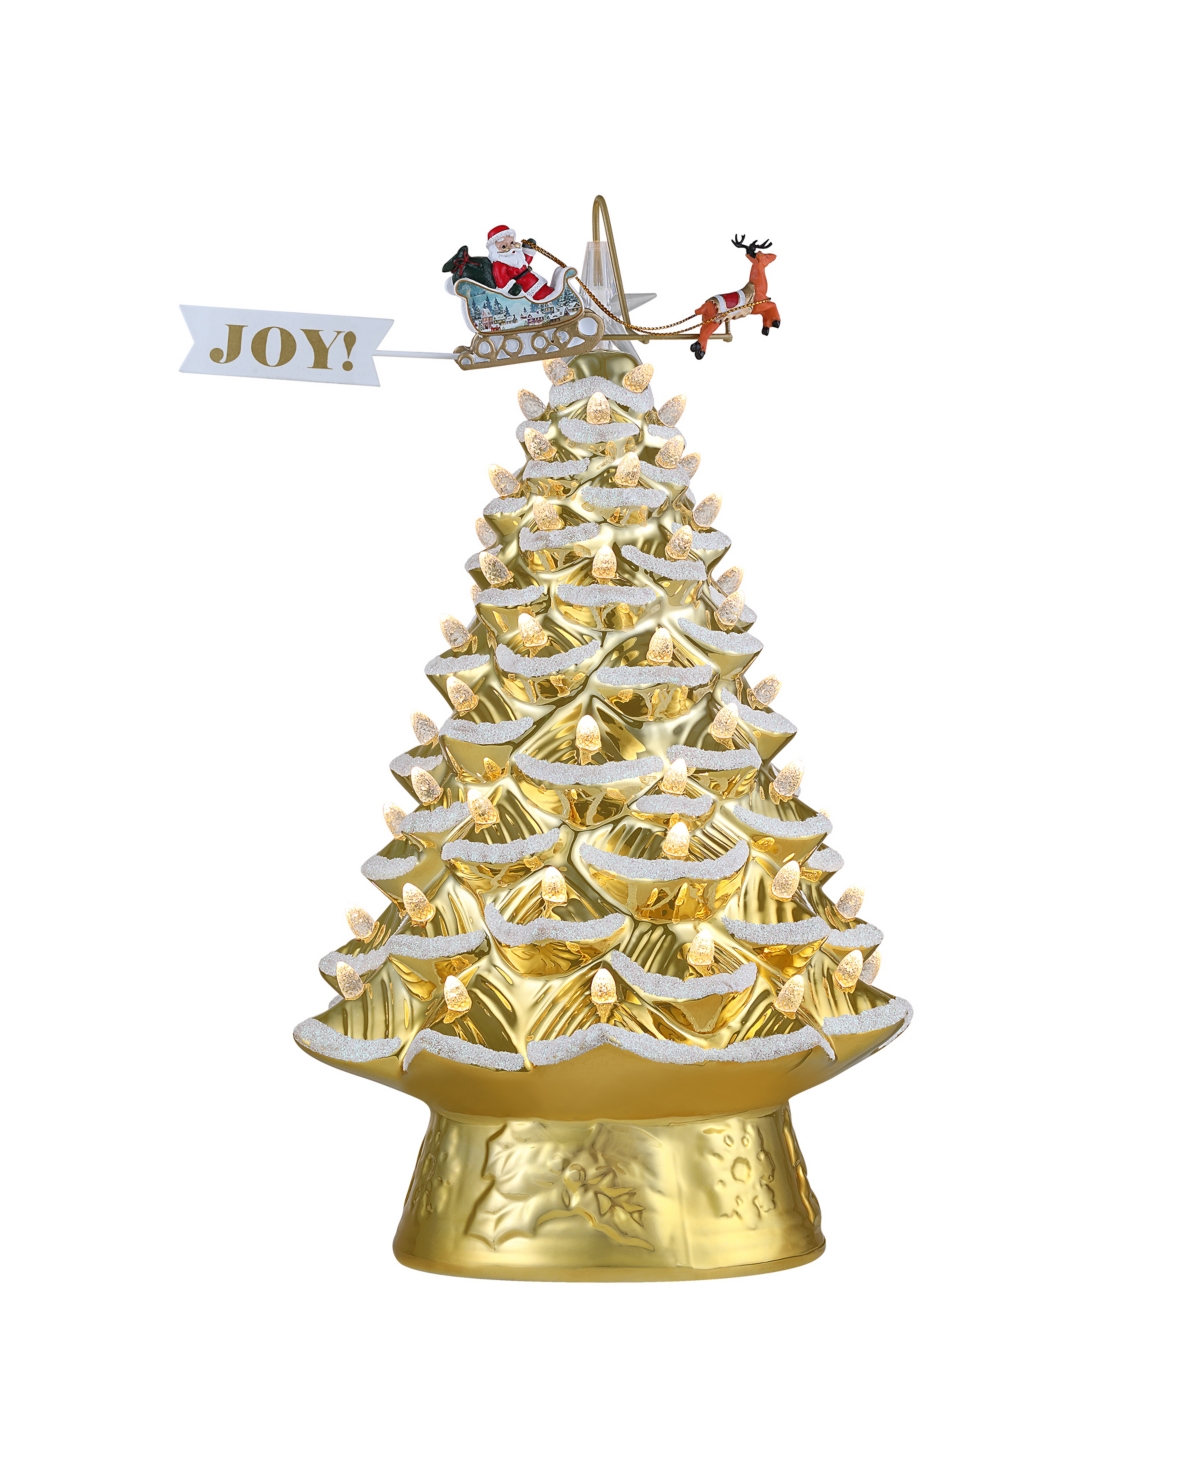 Mr. Christmas 90th Anniversary Collection 16" Lit Kaleidoscope Tree In Gold